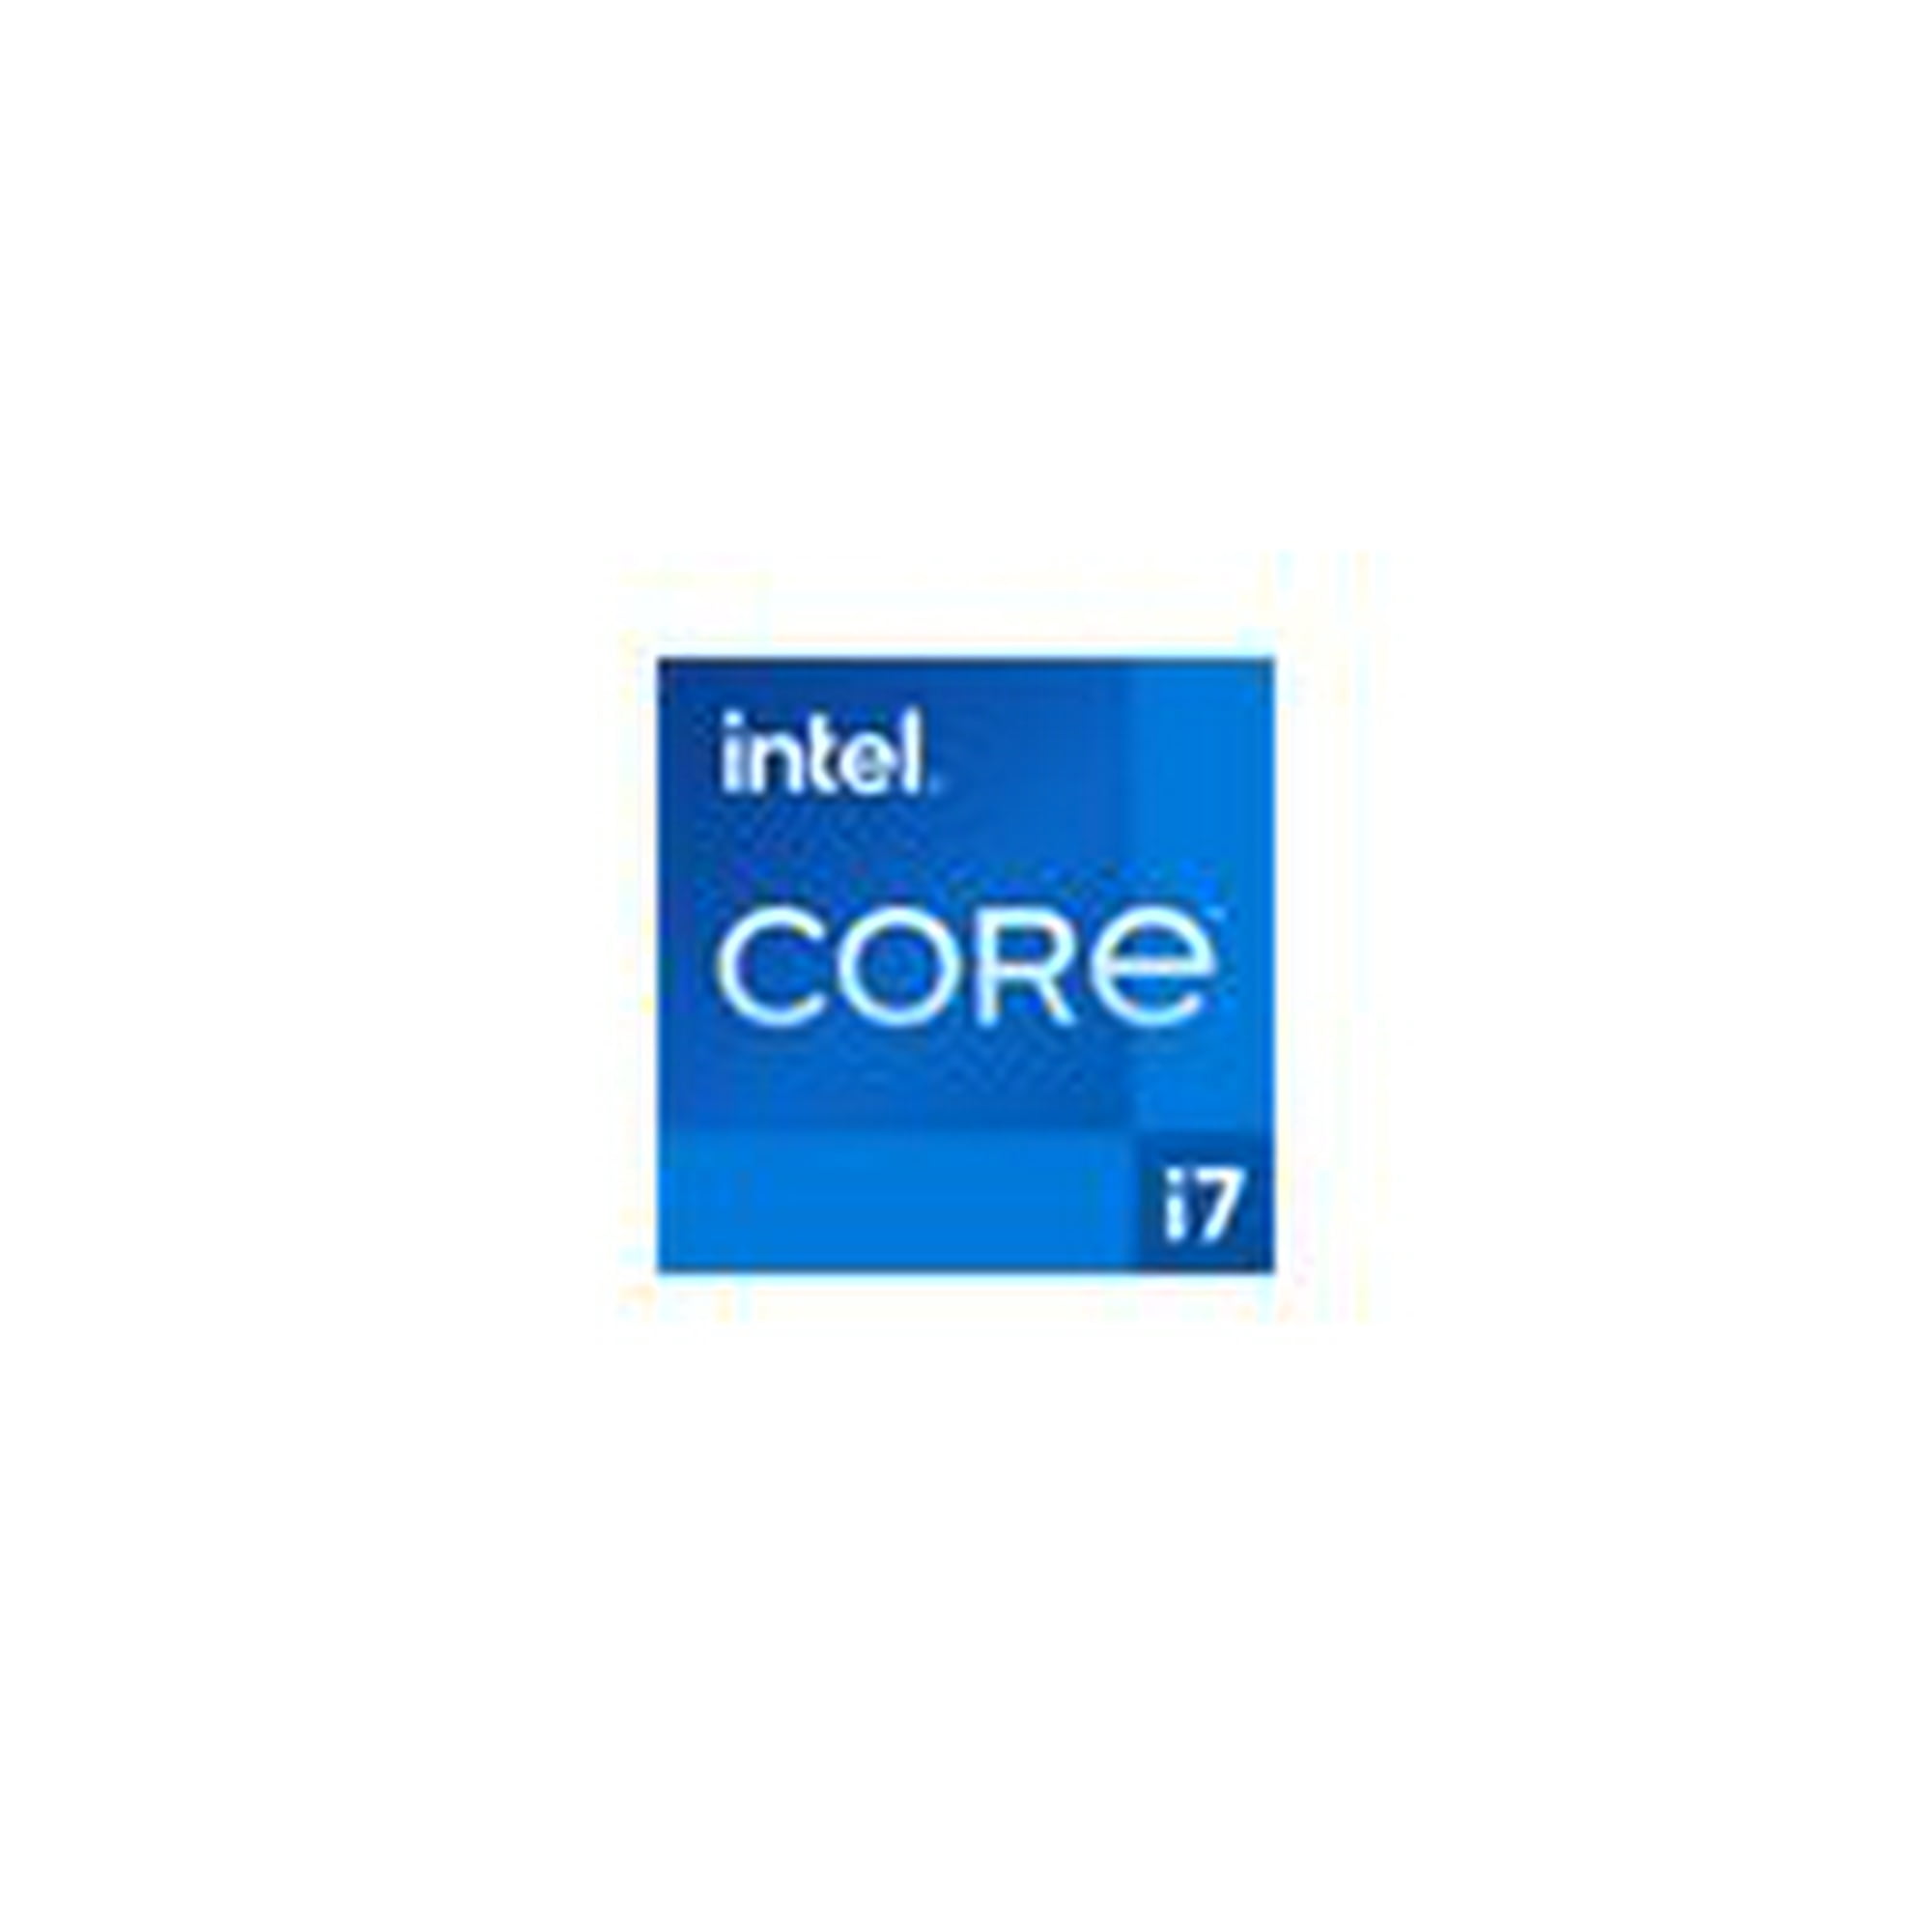 Intel Core i7 12700 - 2.1 GHz - 12-core - 20 threads - 25 MB cache